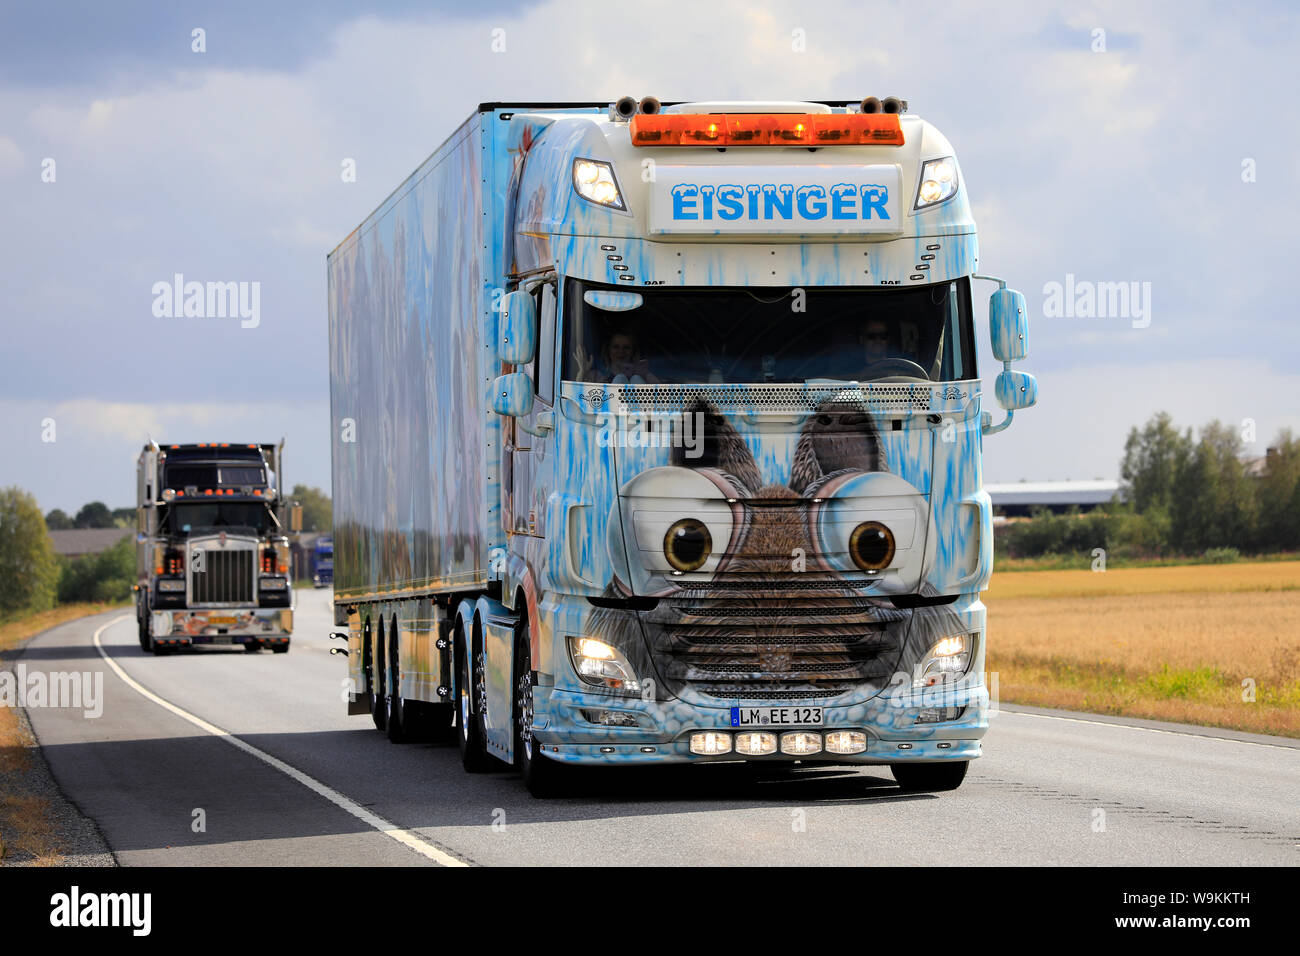 Luopajarvi, Finland. August 8, 2019. Spedition Eisinger DAF XF 106 510 Ice Age and trailer in truck convoy to Power Truck Show 2019. Stock Photo